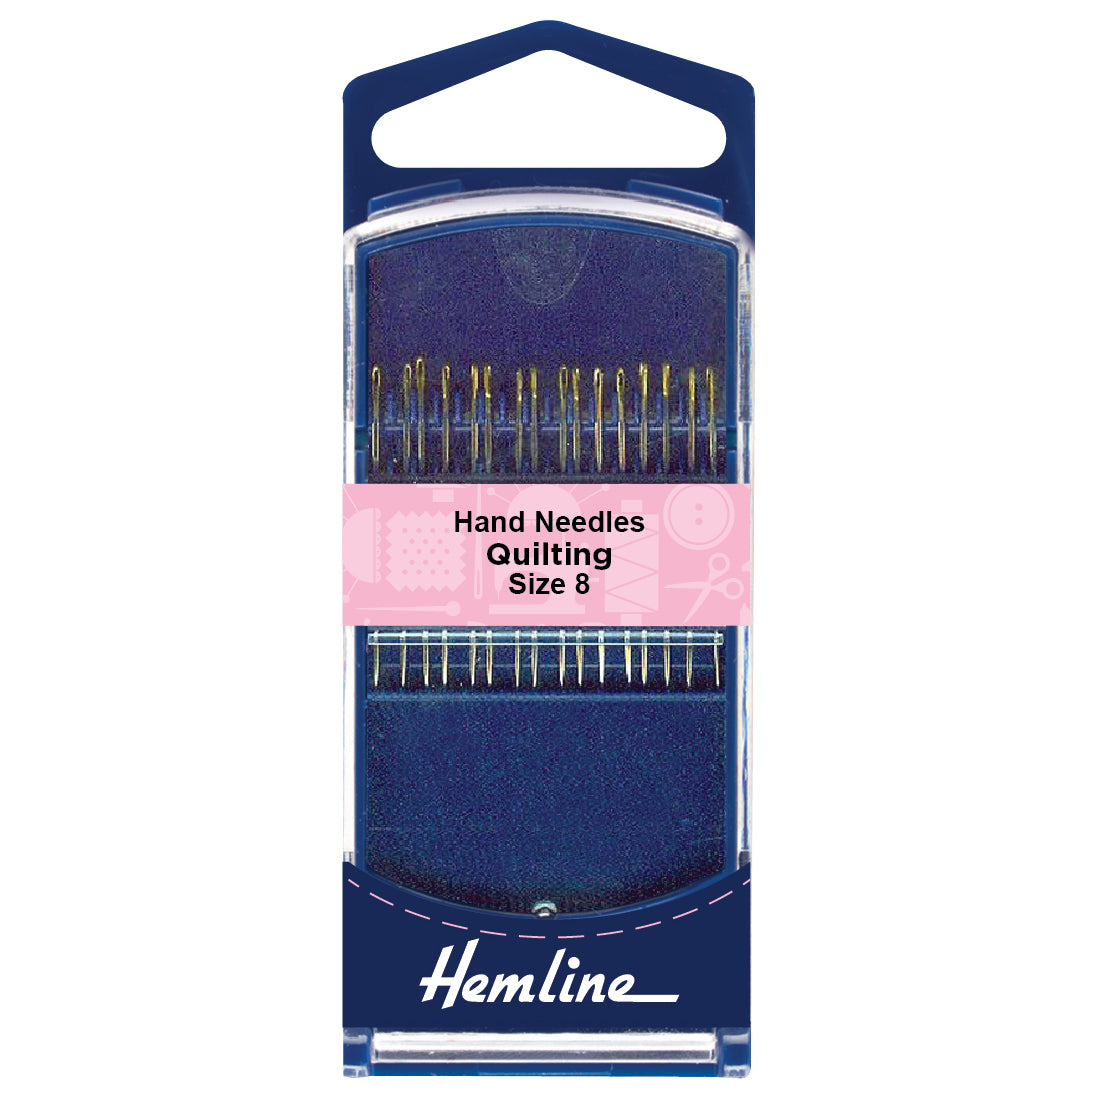 Hand Needles- Quilting Size 8